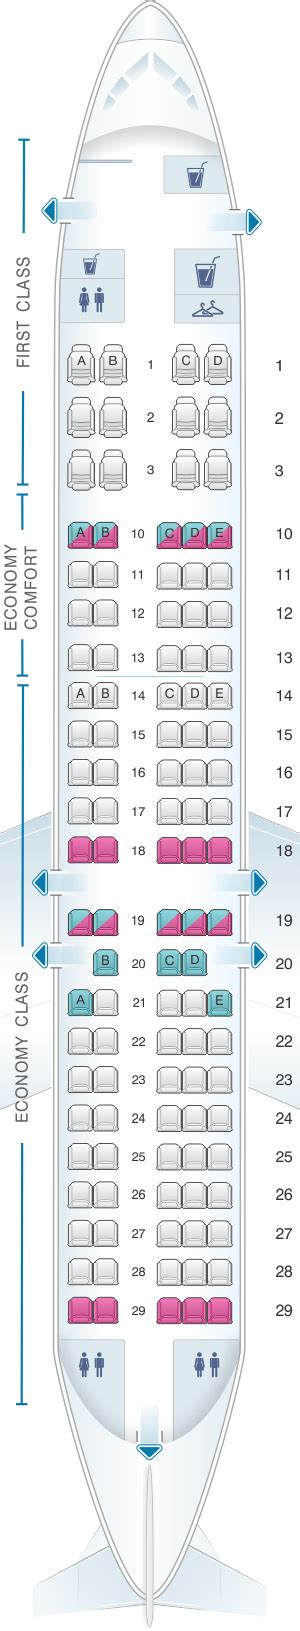 View map. Boeing 777-200ER/LR (7CB) Layout 1. Closed Suite Delta One (Rows 1-8) Recliner Delta Premium Select (Rows 20-25) Standard Delta Comfort+ (Rows 30-40) Standard Economy (Rows 44-57) Viewing. For your next Delta flight, use this seating chart to get the most comfortable seats, legroom, and recline on . 